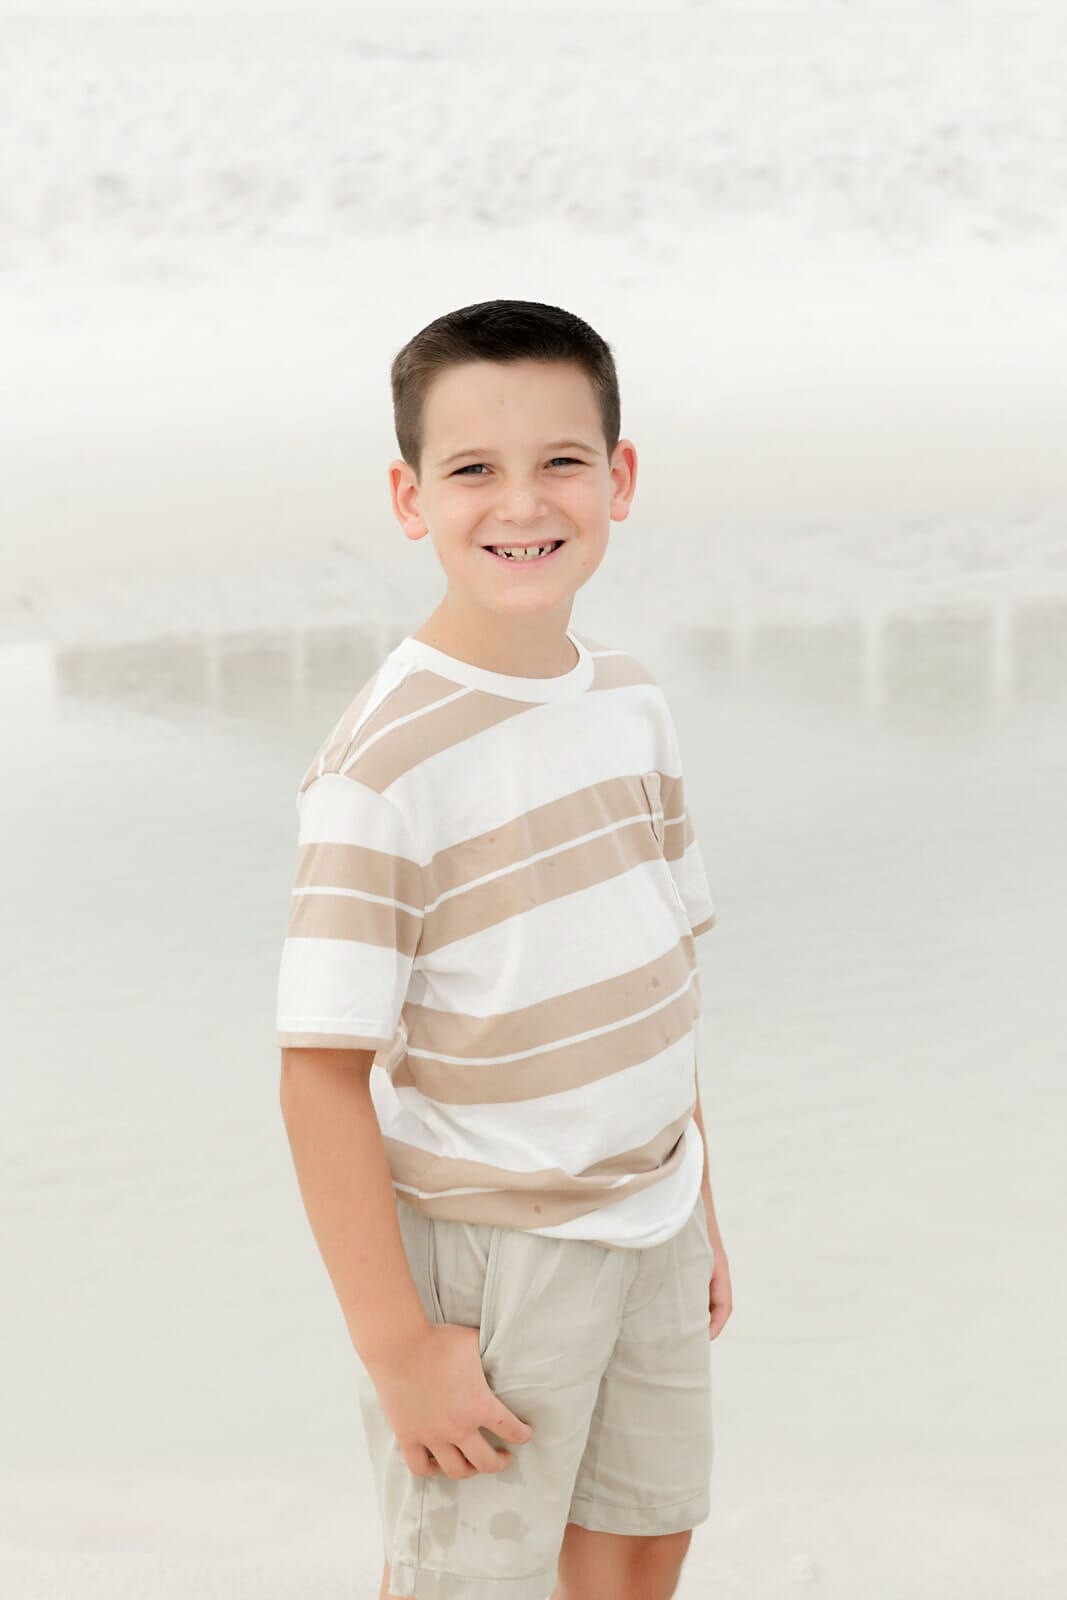 A boy in a striped shirt standing on the beach Destin Holiday Isle.